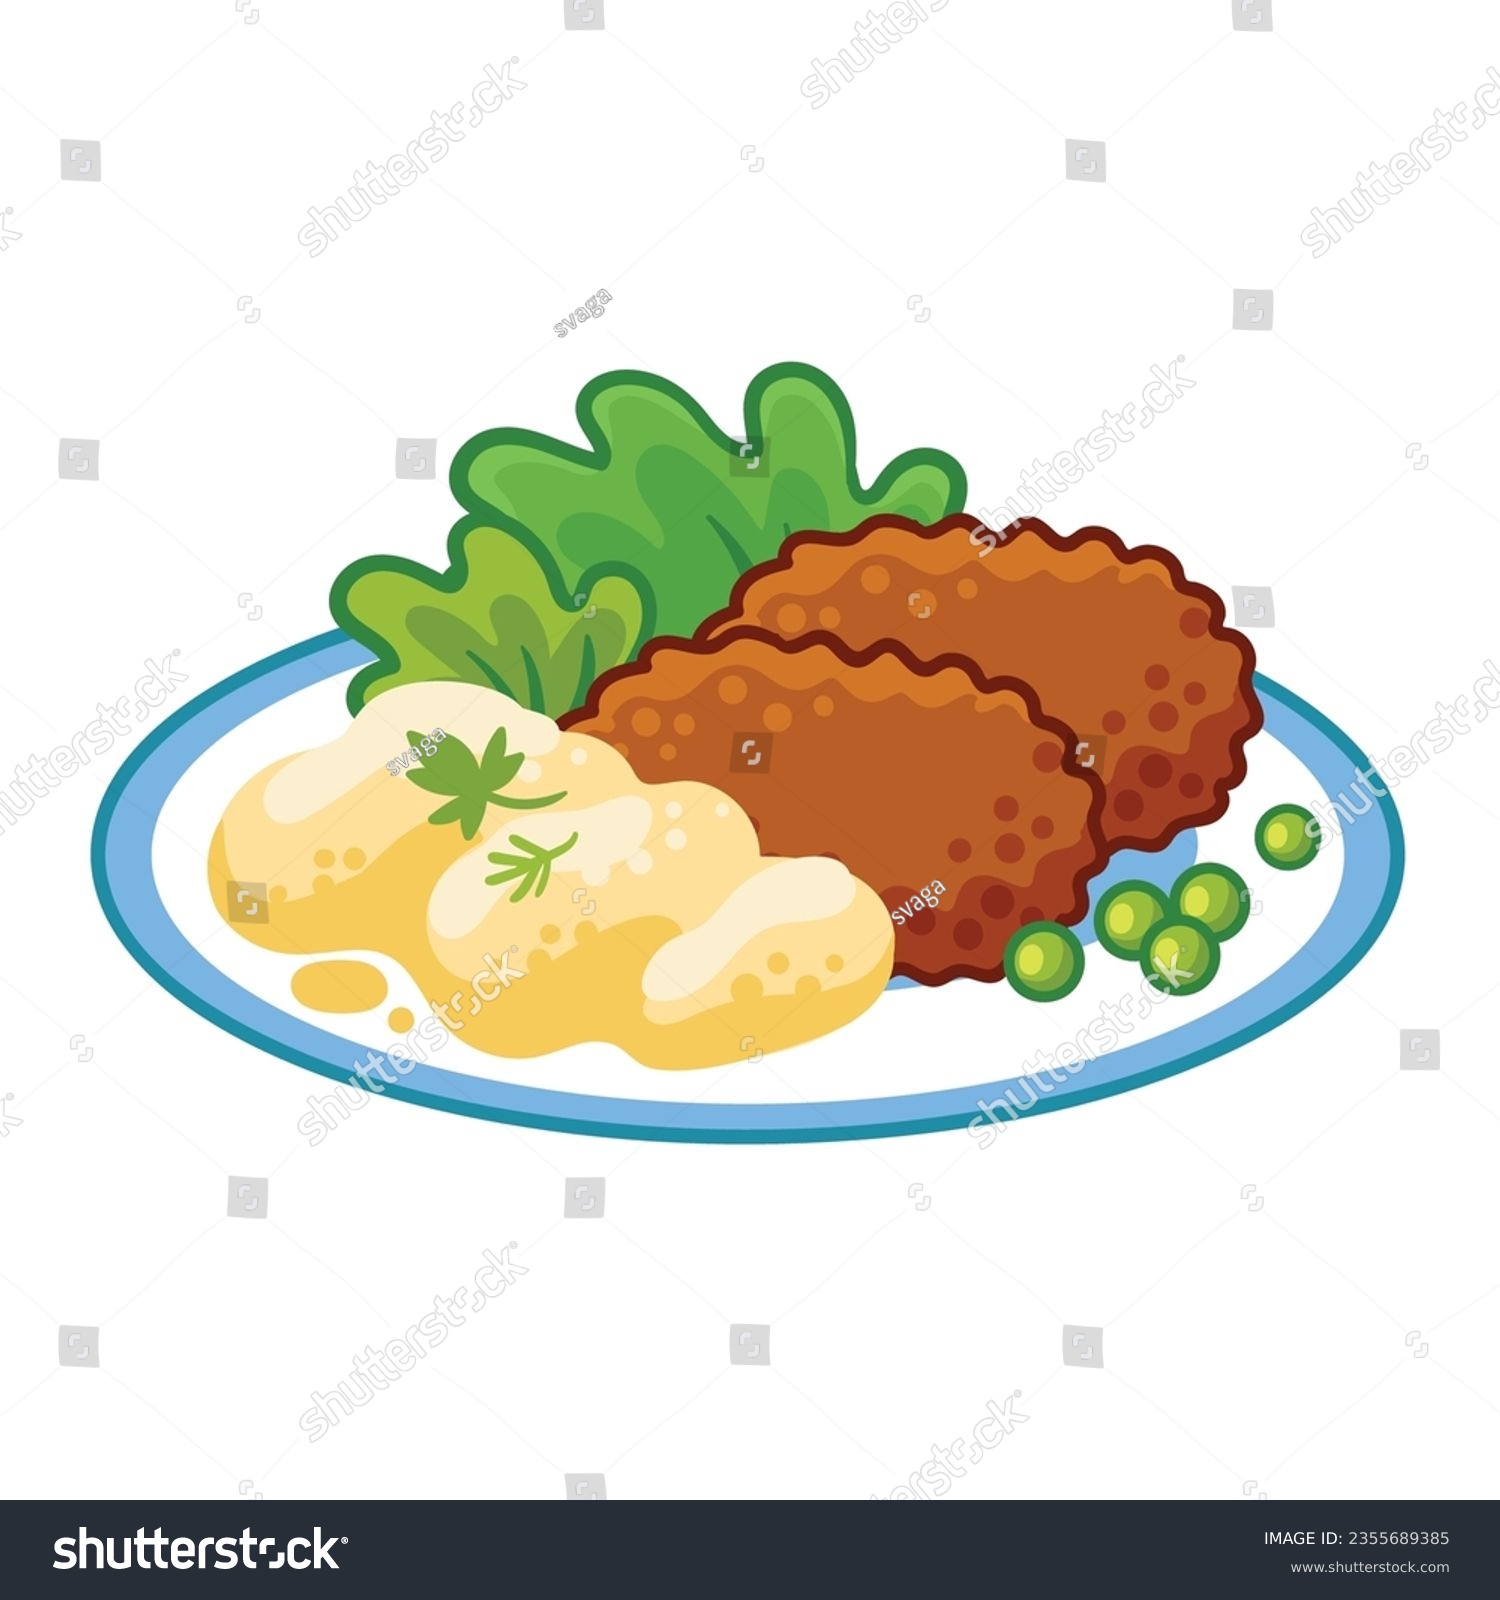 SVG of Mashed potatoes with cutlets, green peas and salad on a white plate. Vector illustration in cartoon style on white background. svg